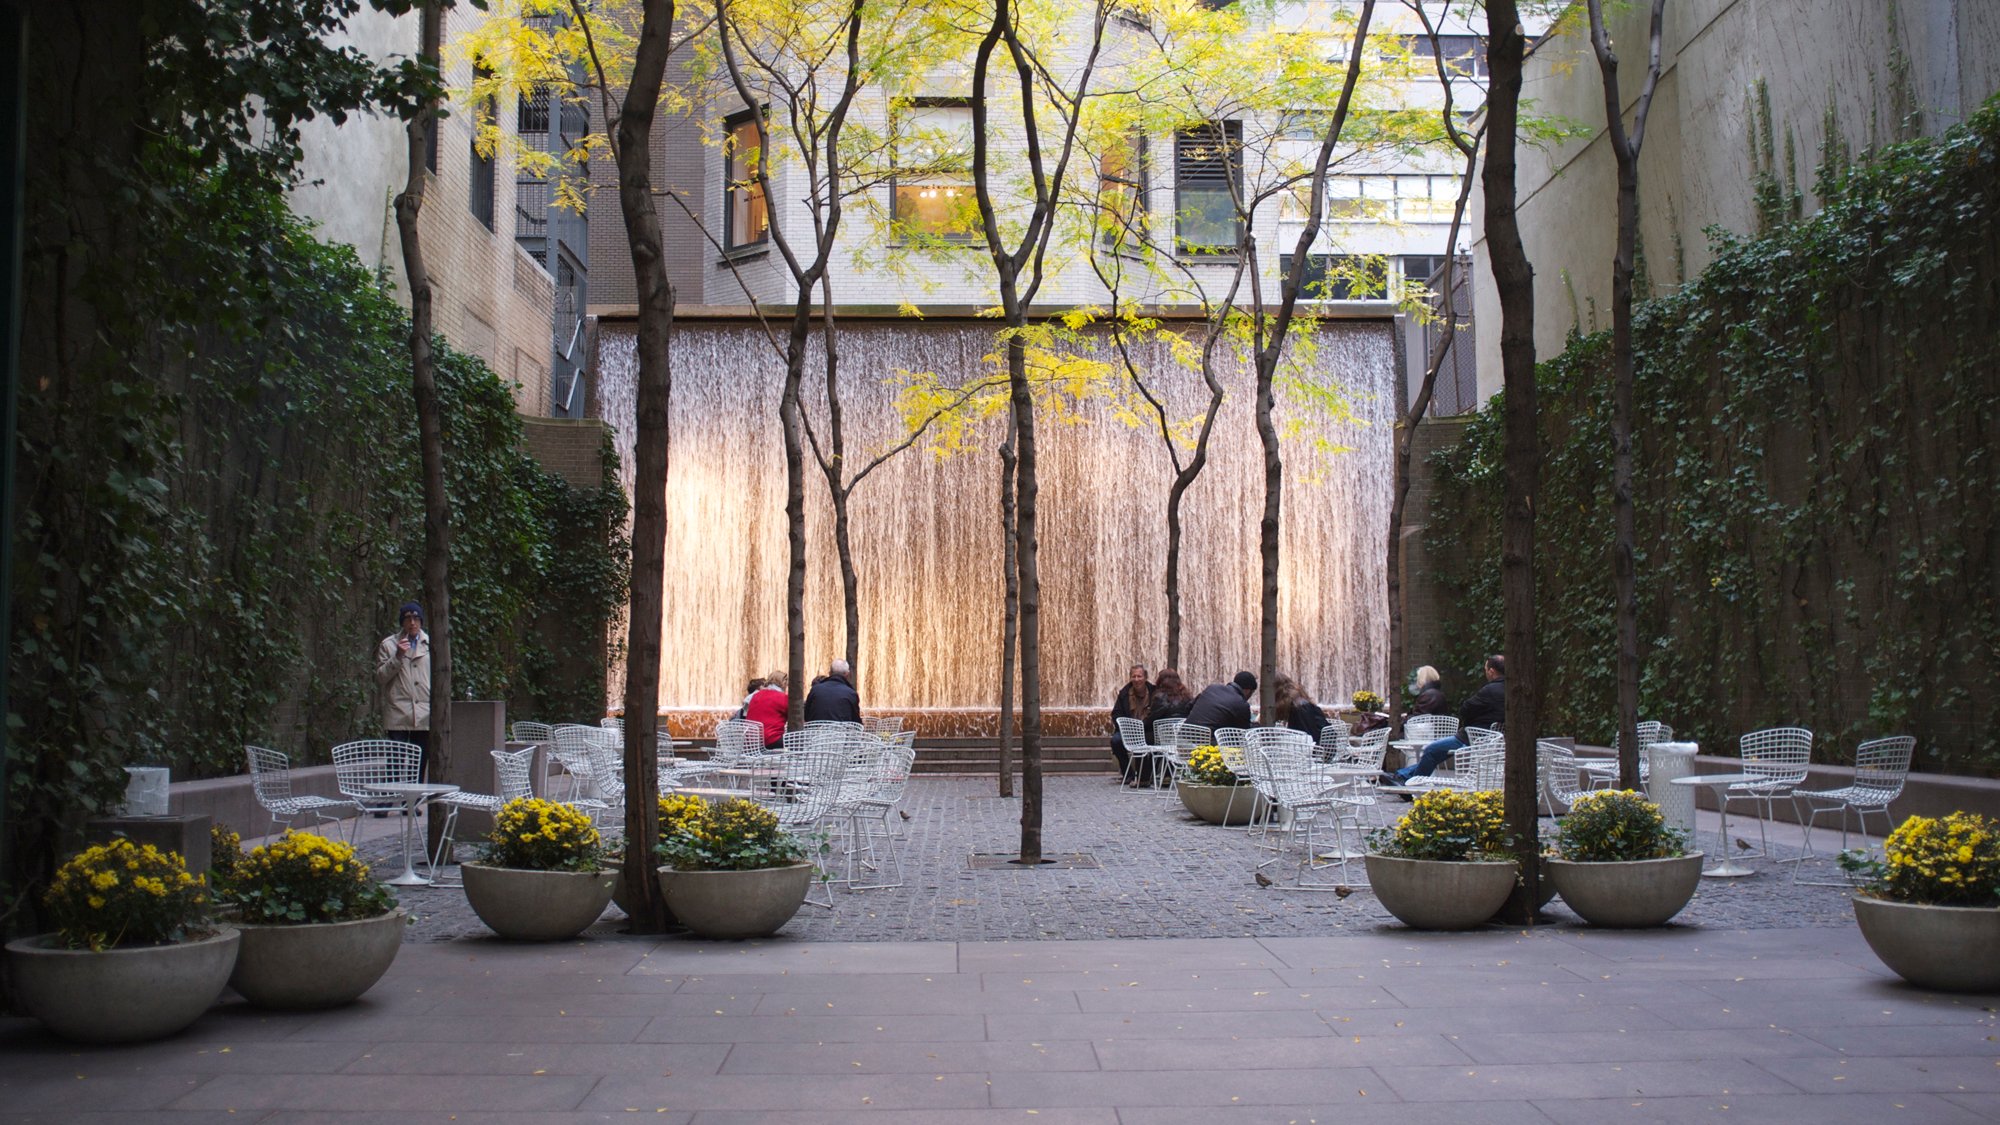 View of Paley Park, New York.